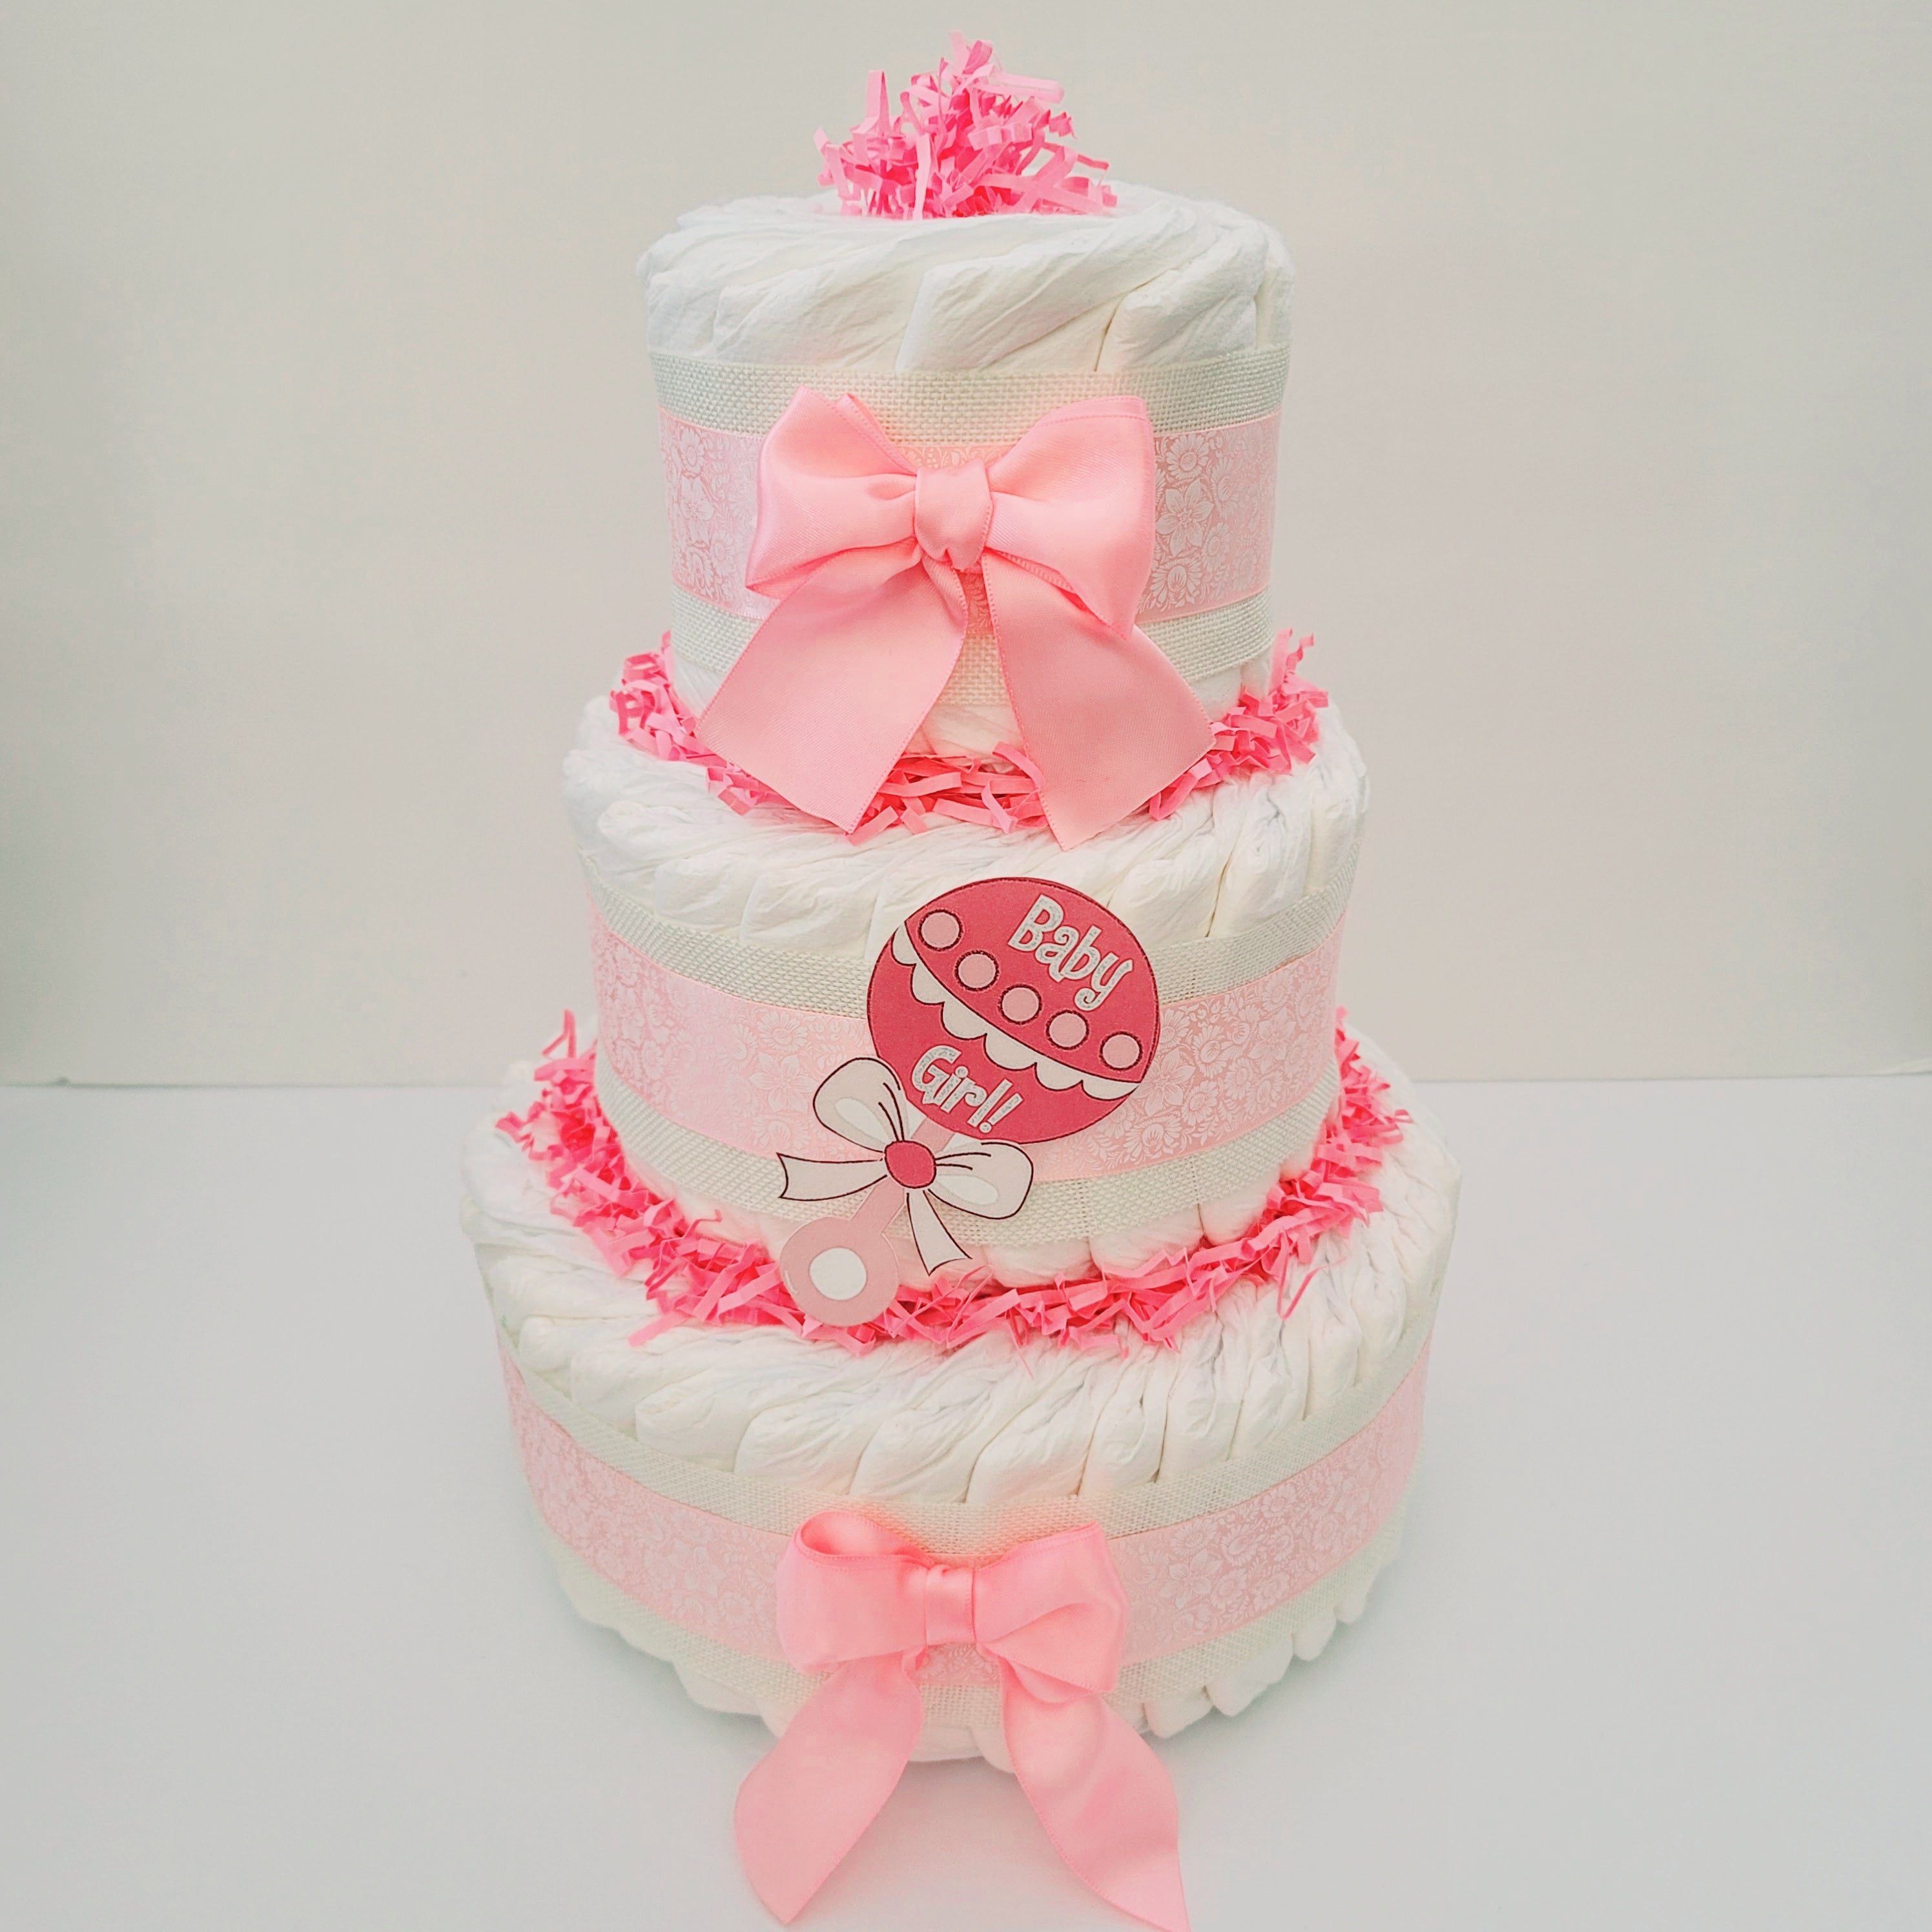 It's A Girl! Mini Diaper Cake at Best Prices